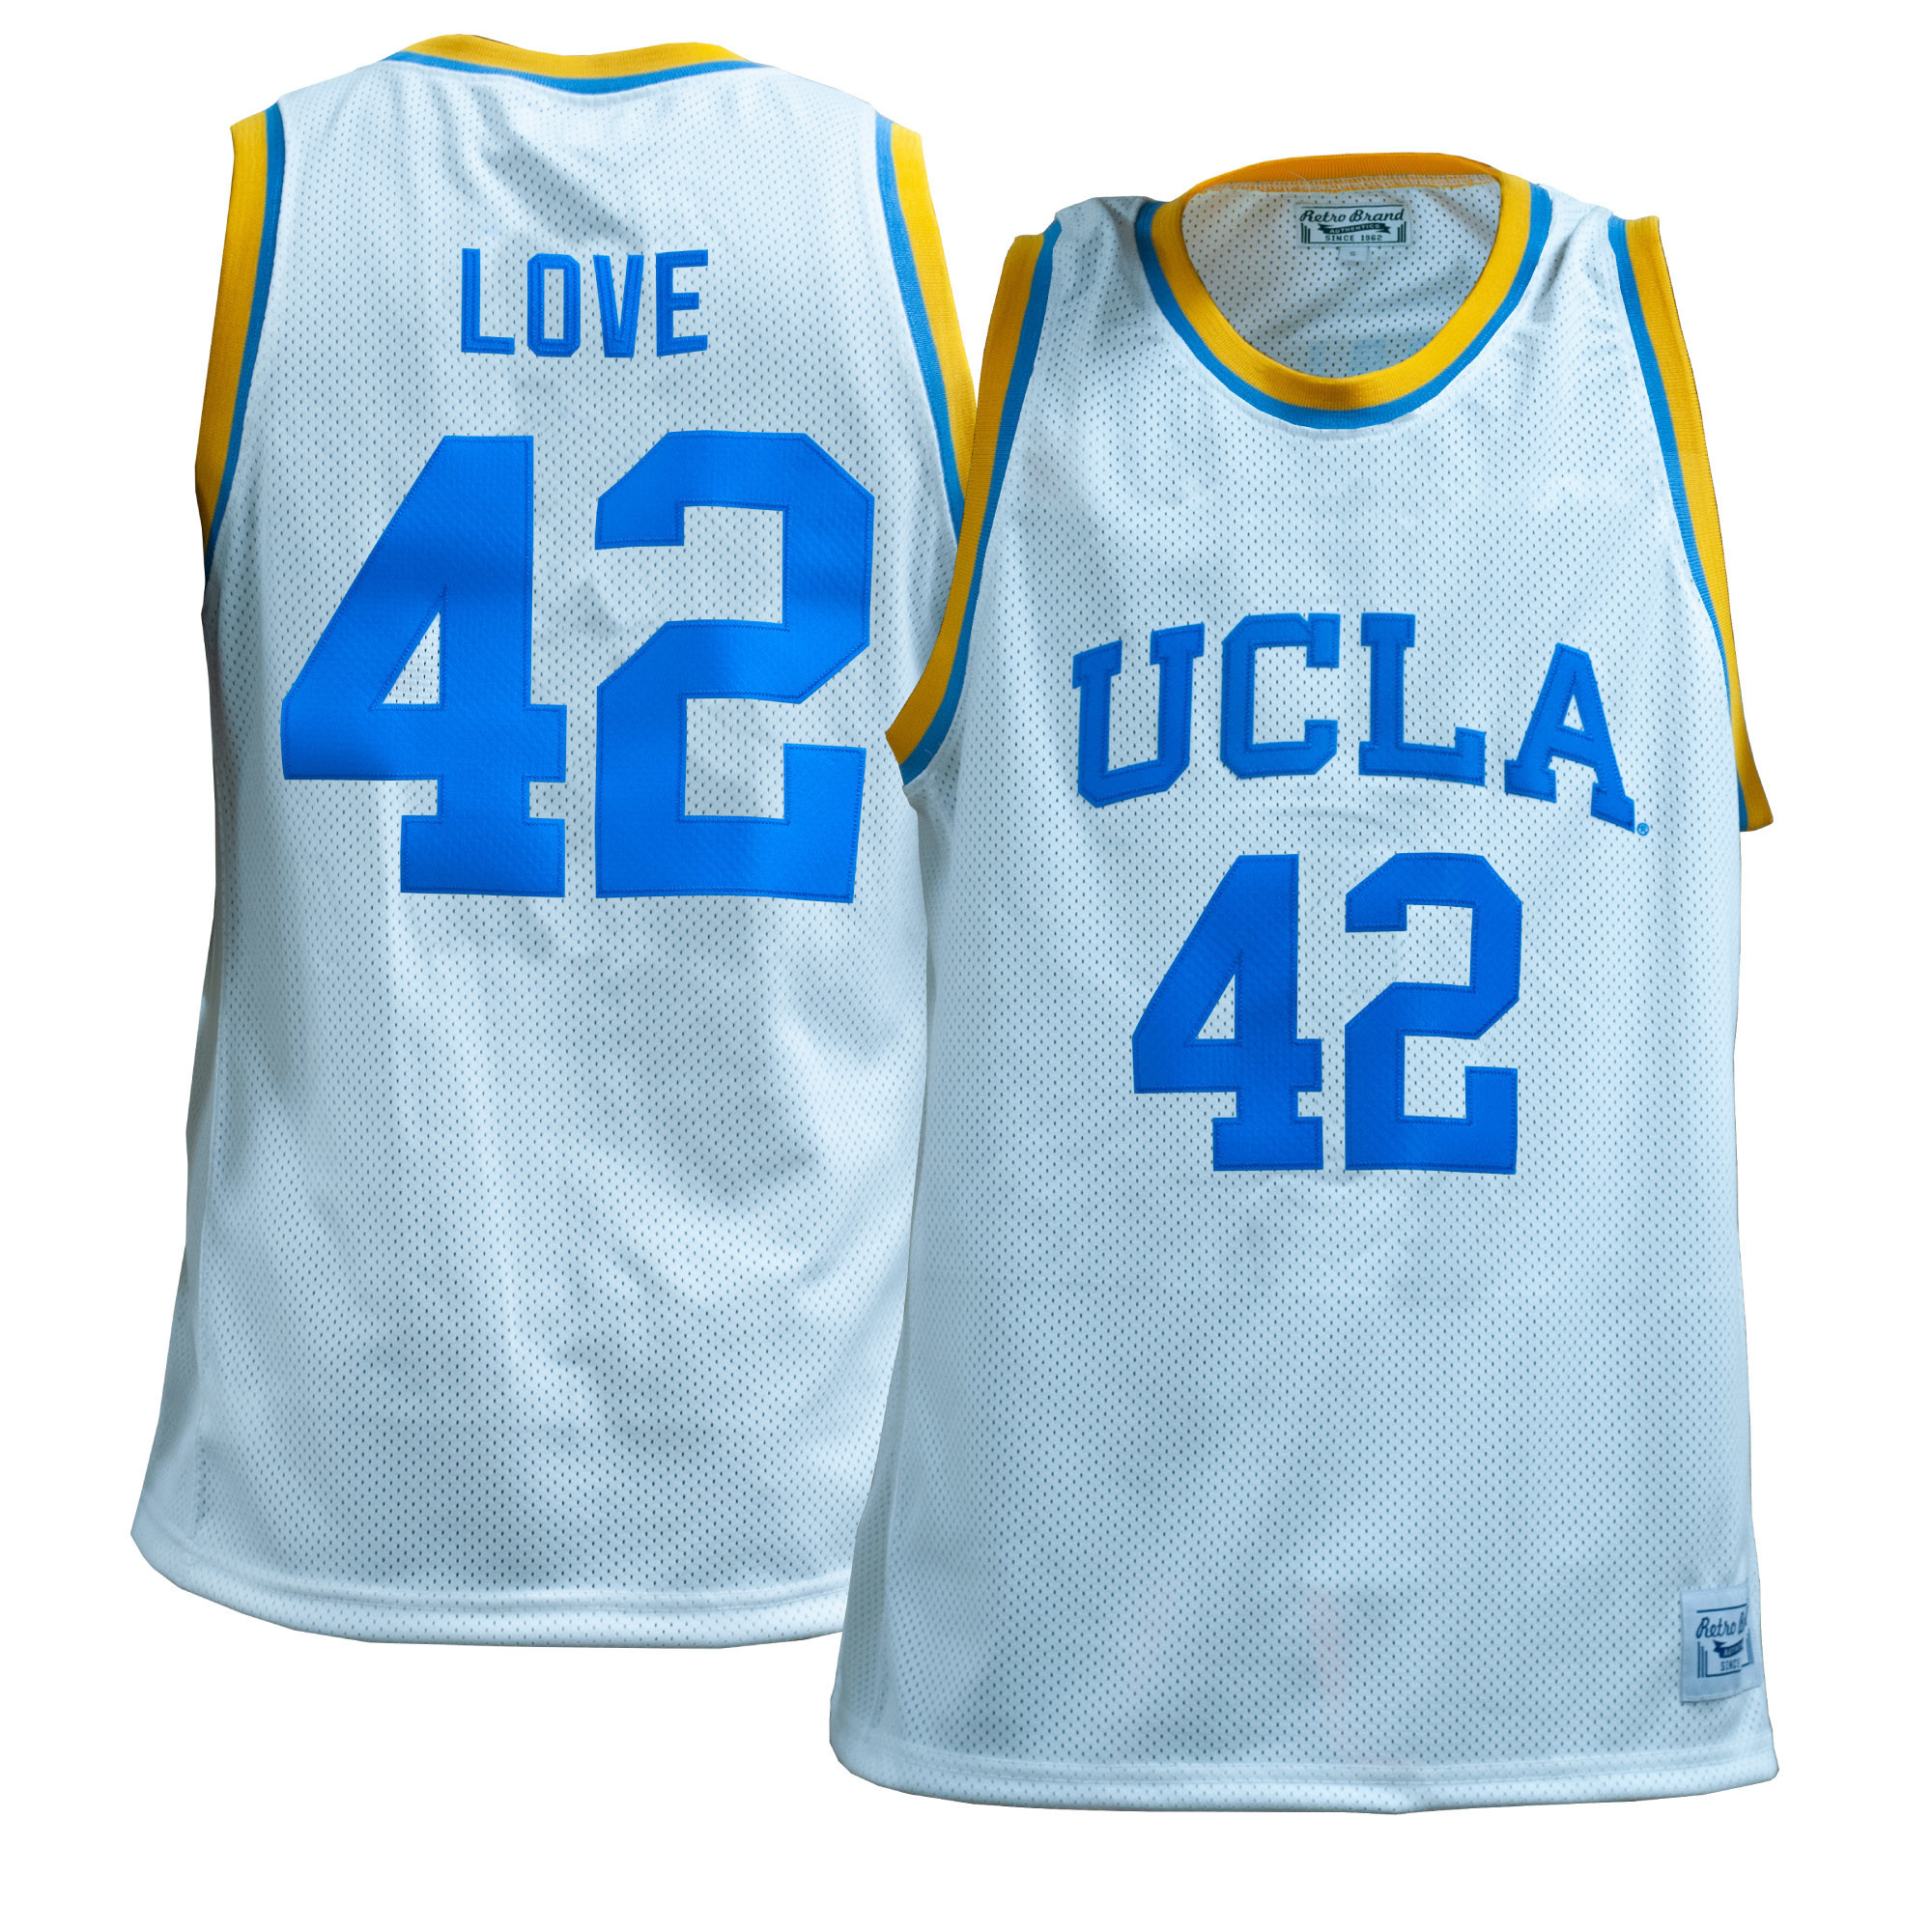 UCLA Blue Basketball Jersey Final Four 2008 Love #42 - Campus Store